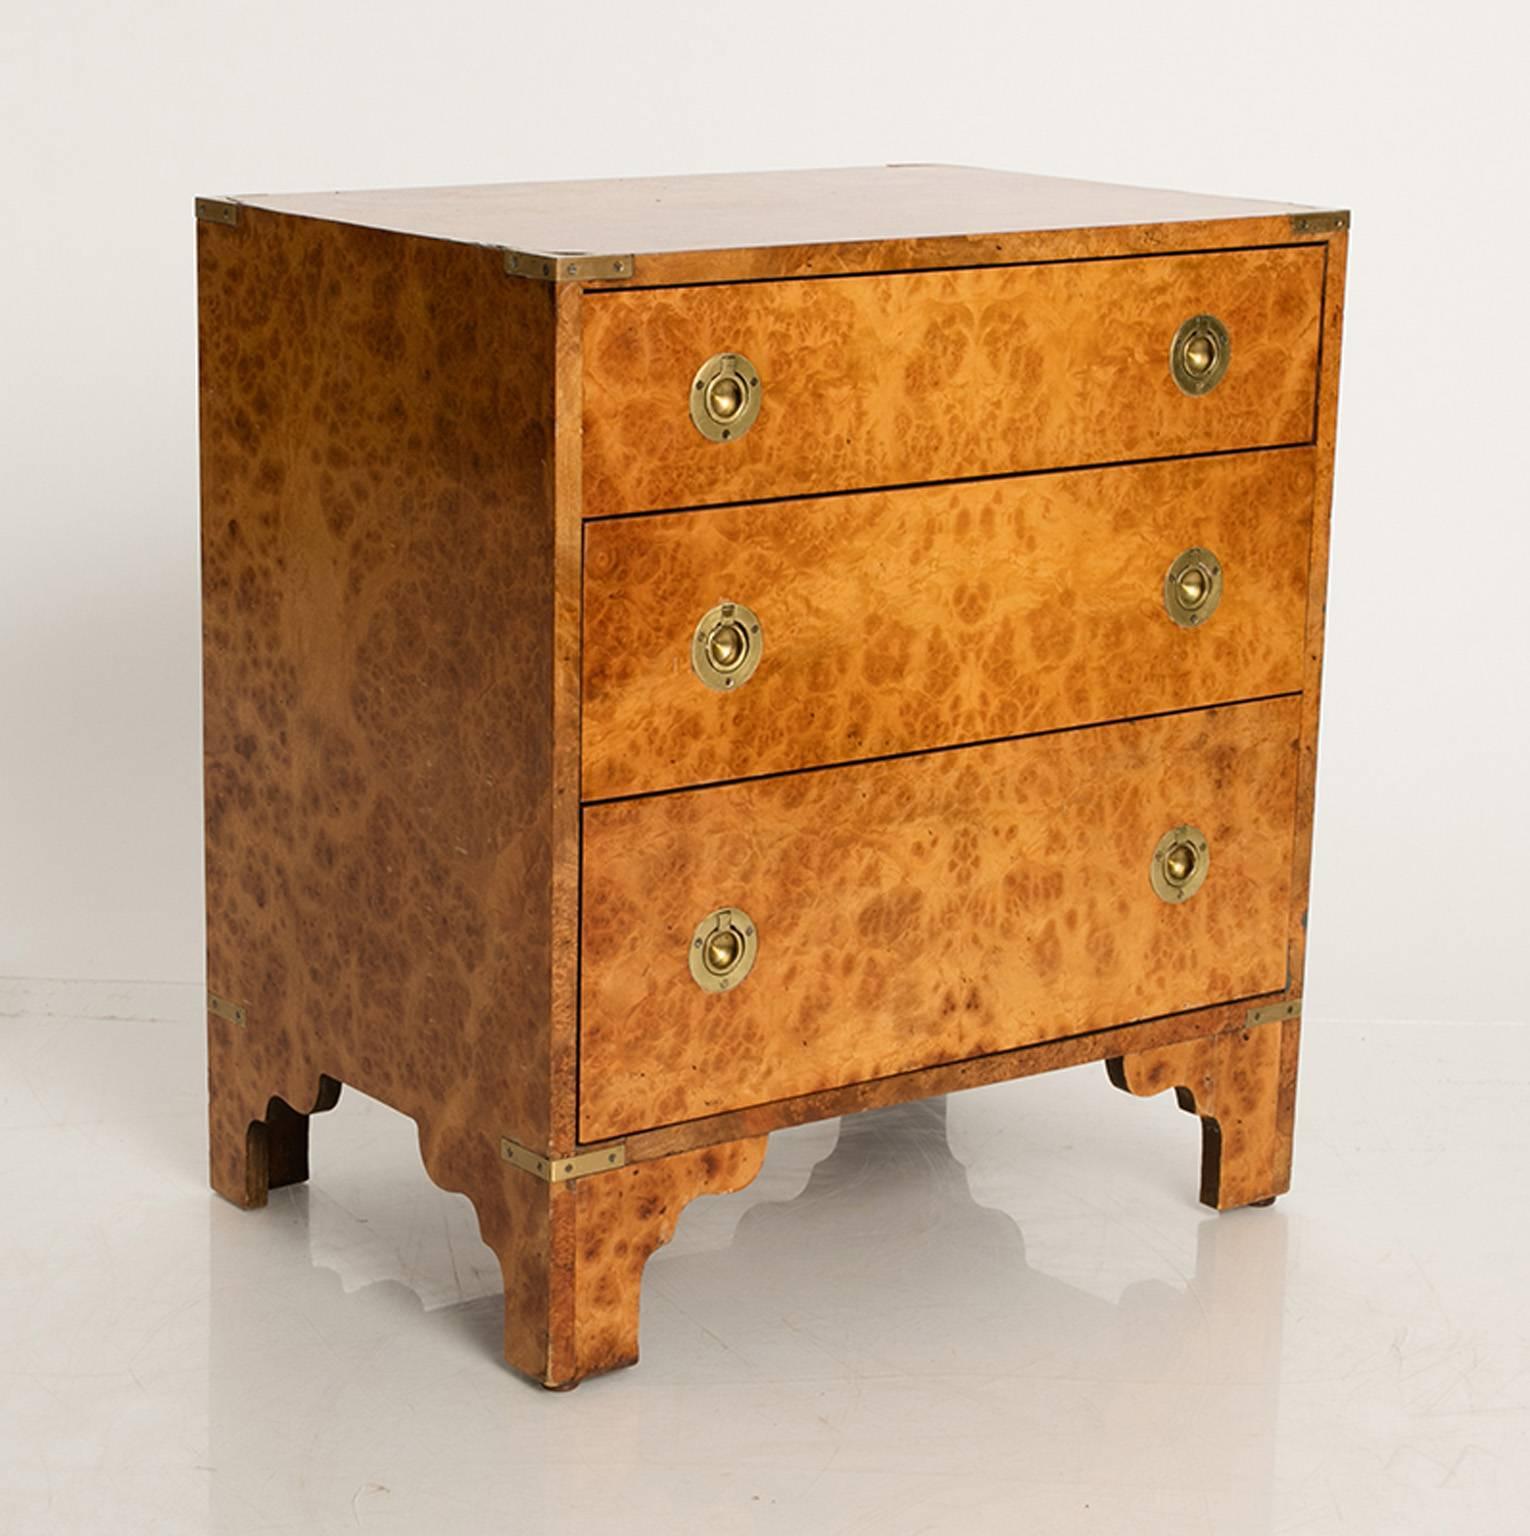 Three-drawer chest of drawers with inset ring pulls. Made from a pretty burl wood.